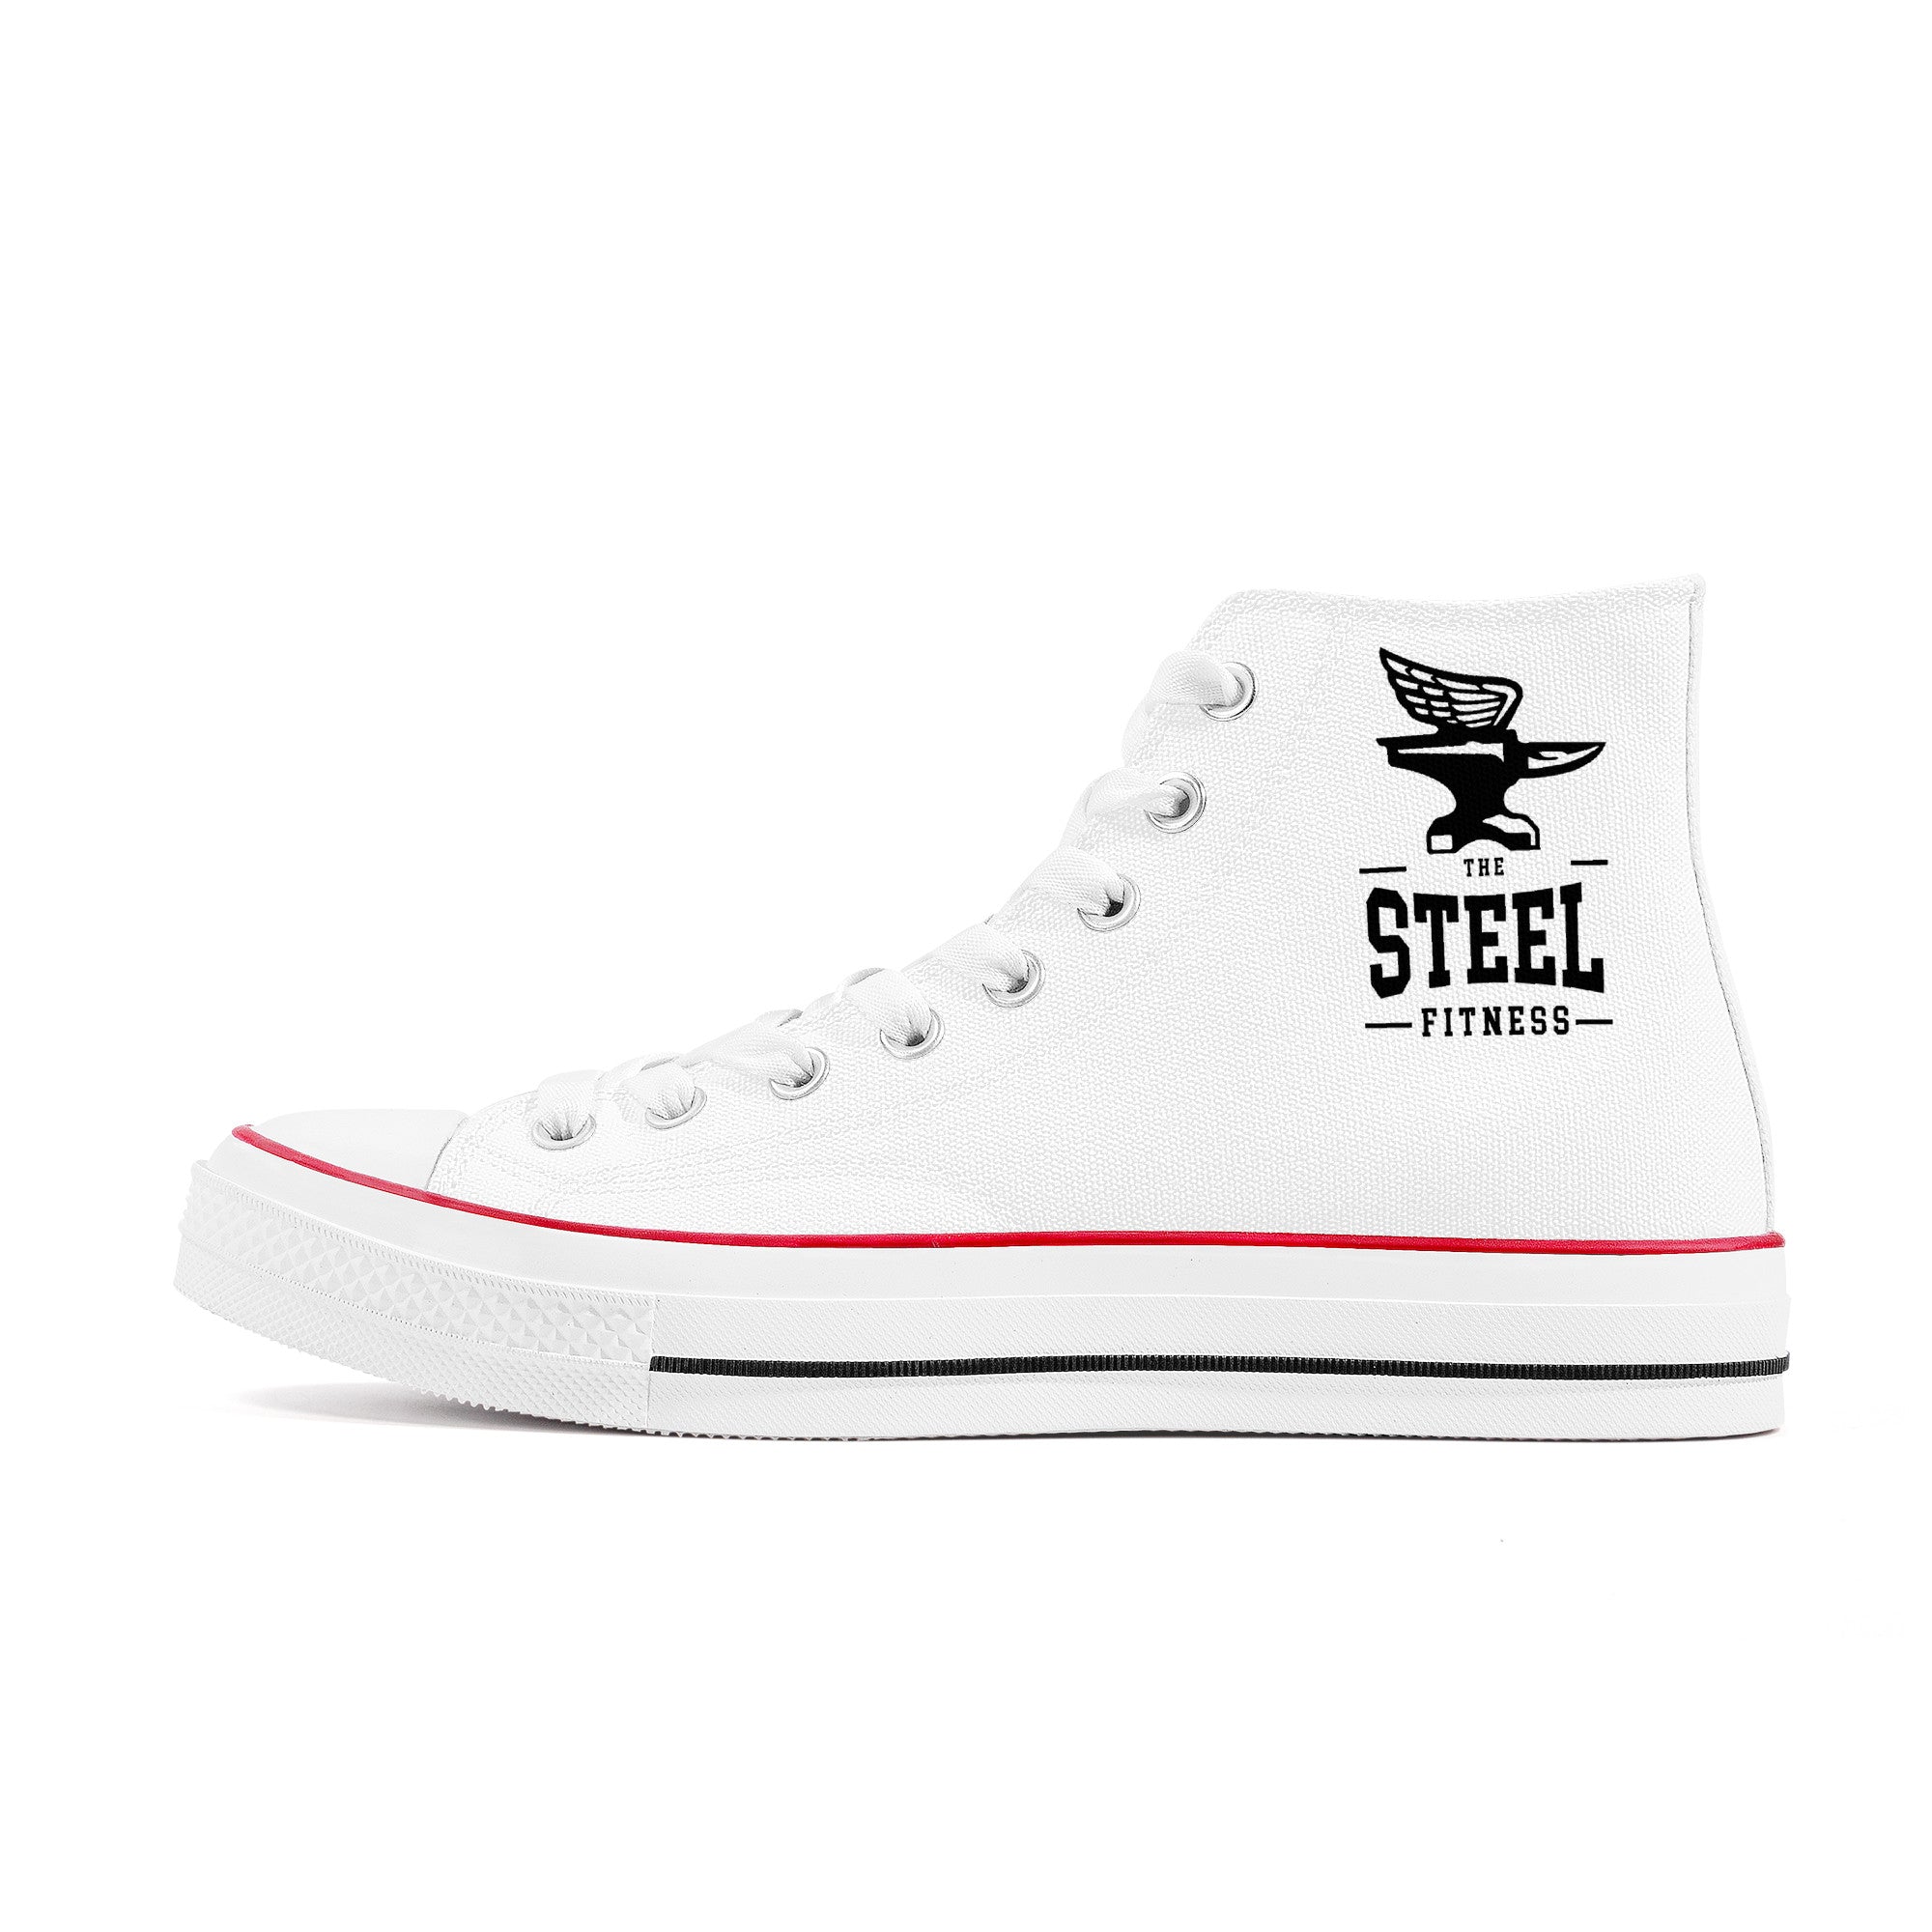 Steel Fitness High Top Canvas Shoes - White - Shoe Zero